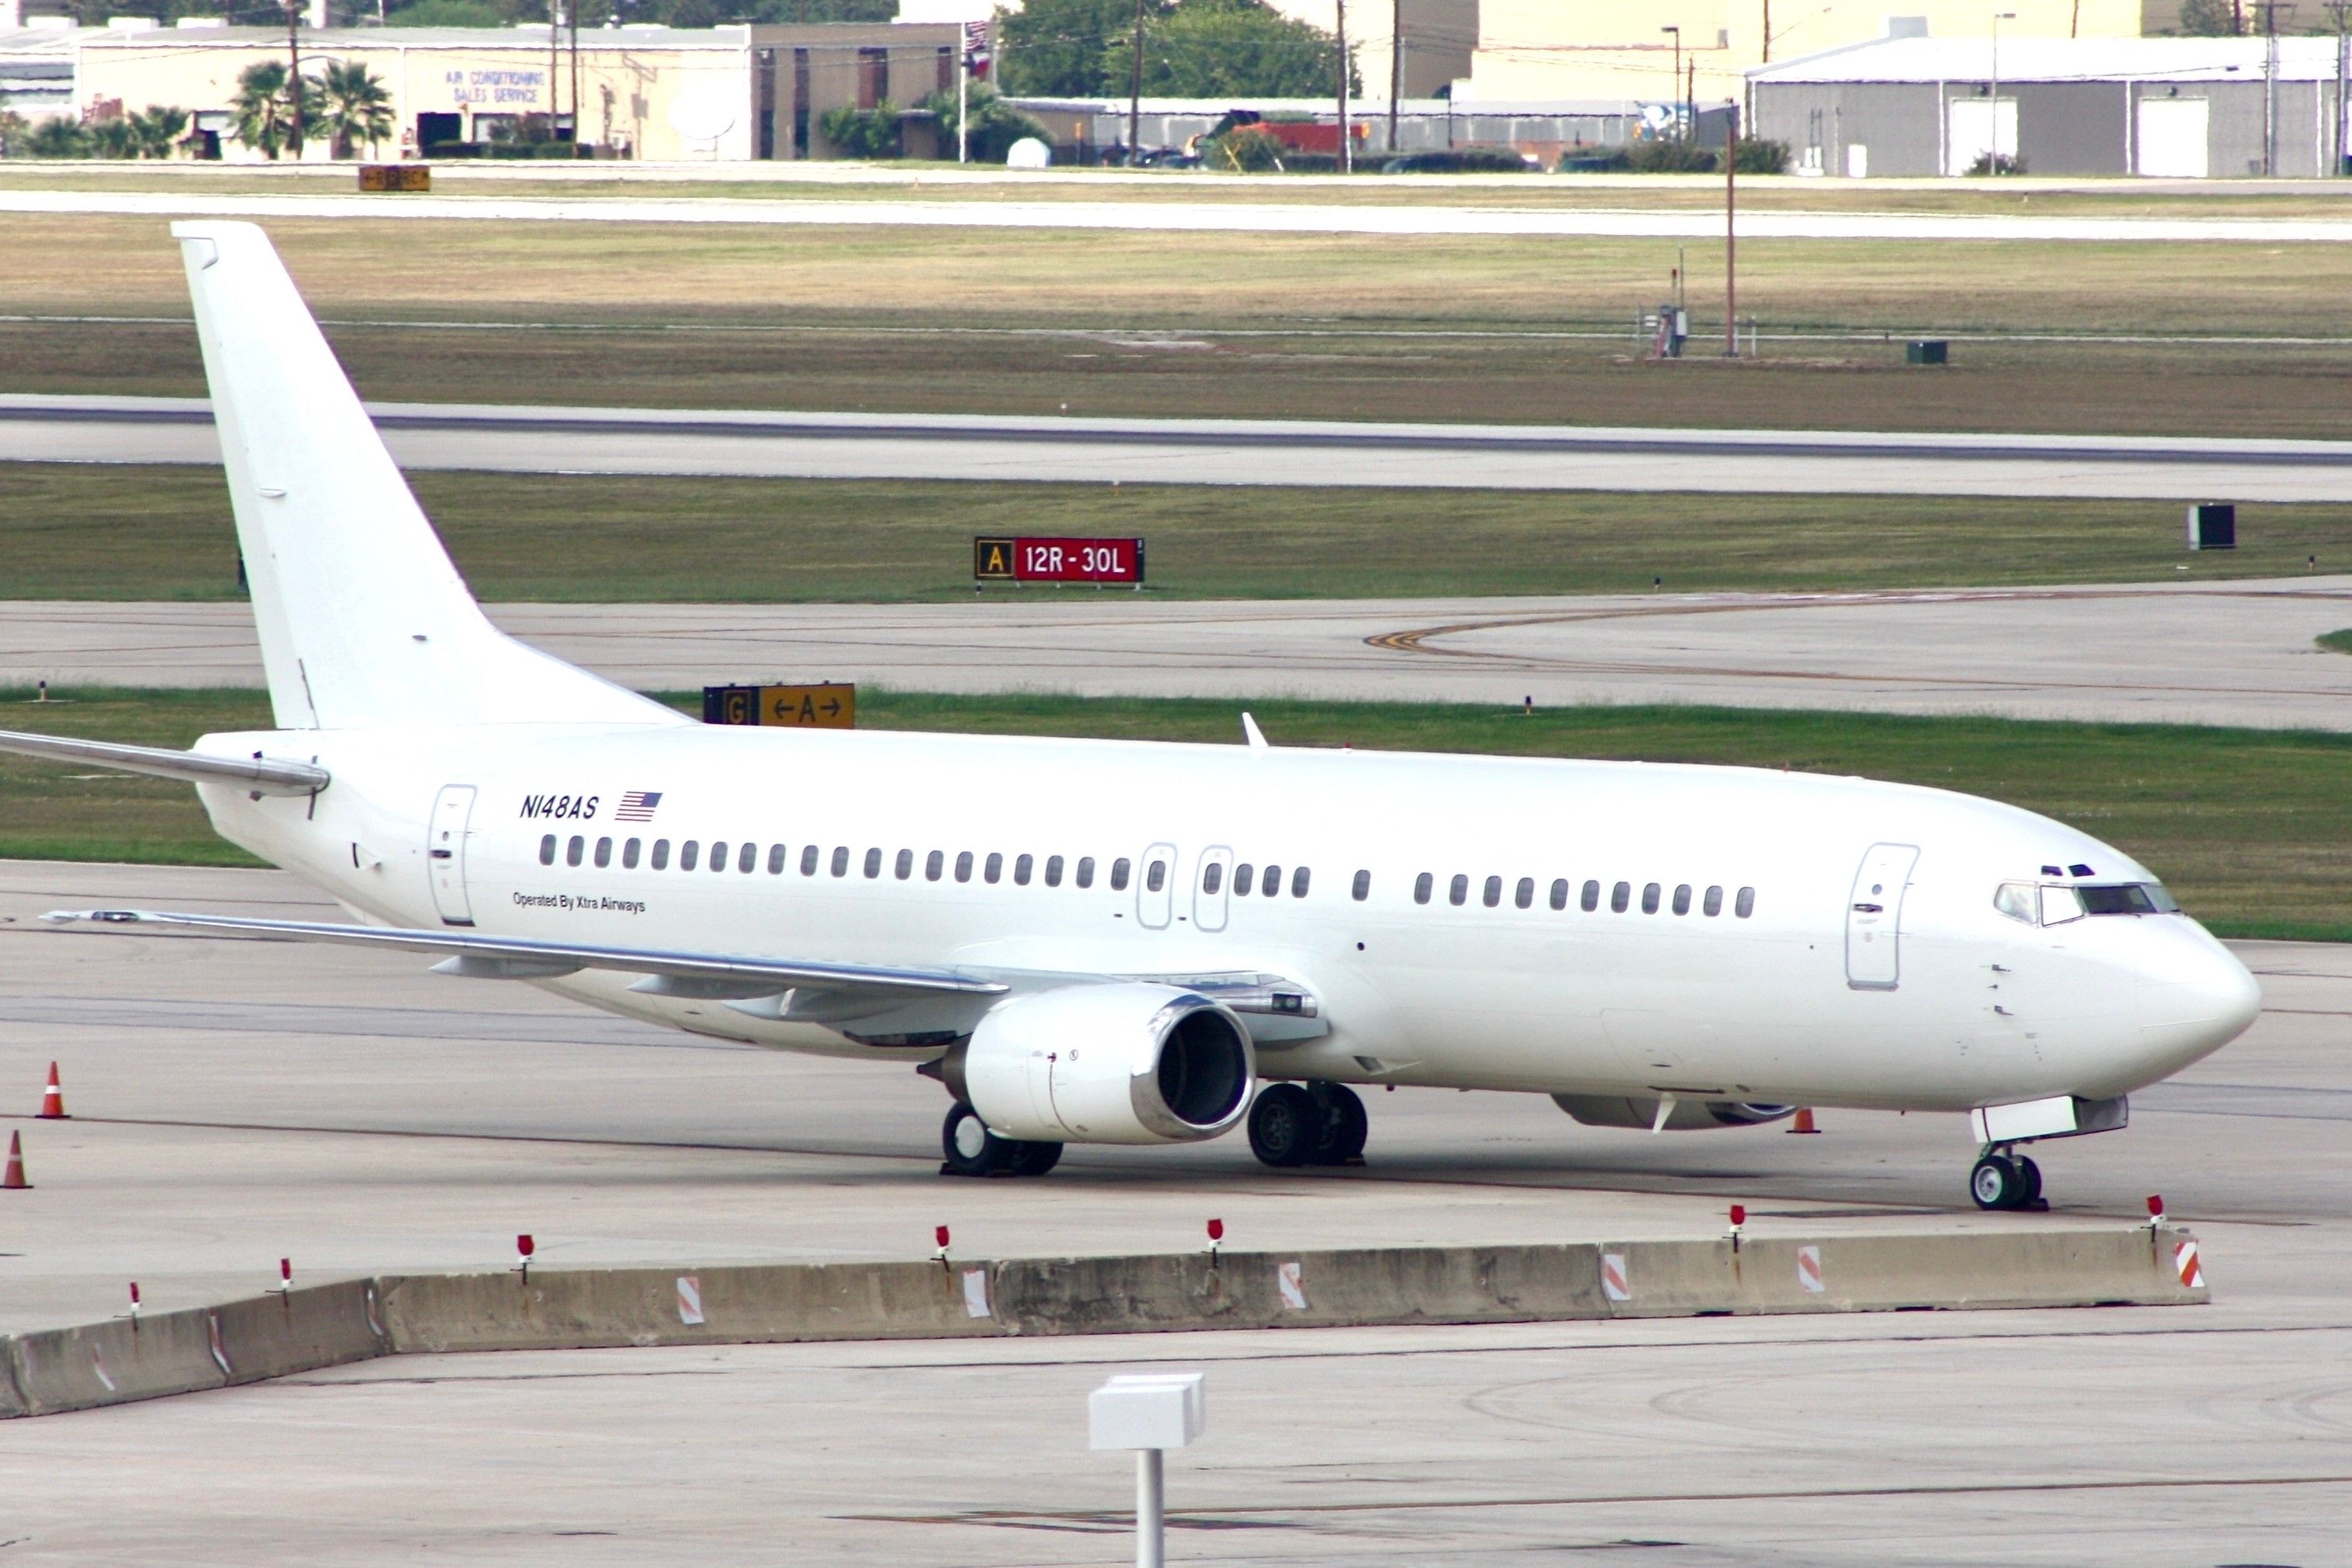 A Plain White Boeing 737-400 Parked on the airport apron in San Antonio.